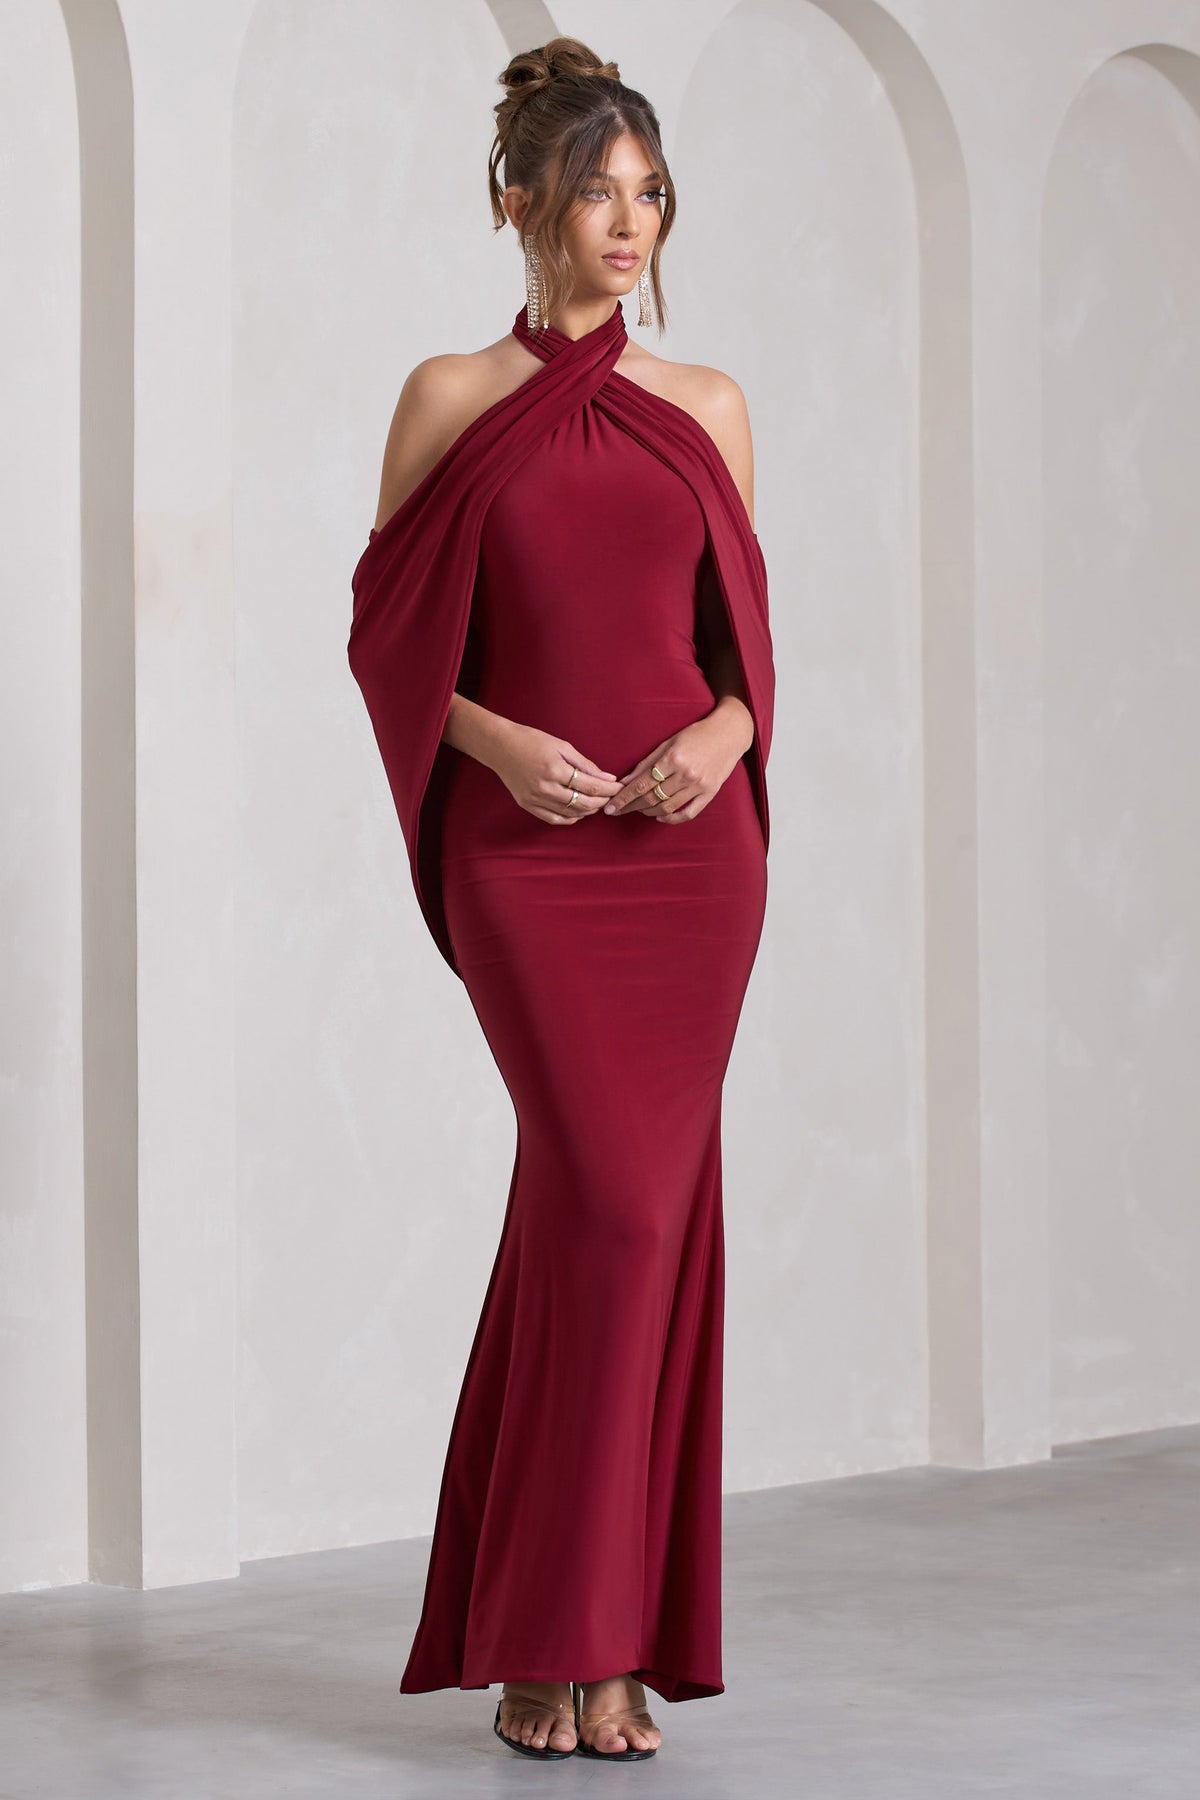 Dress Maxi With Berry Revelation London L – - USA Cape Club Crossed Halter-Neck Red Fishtail